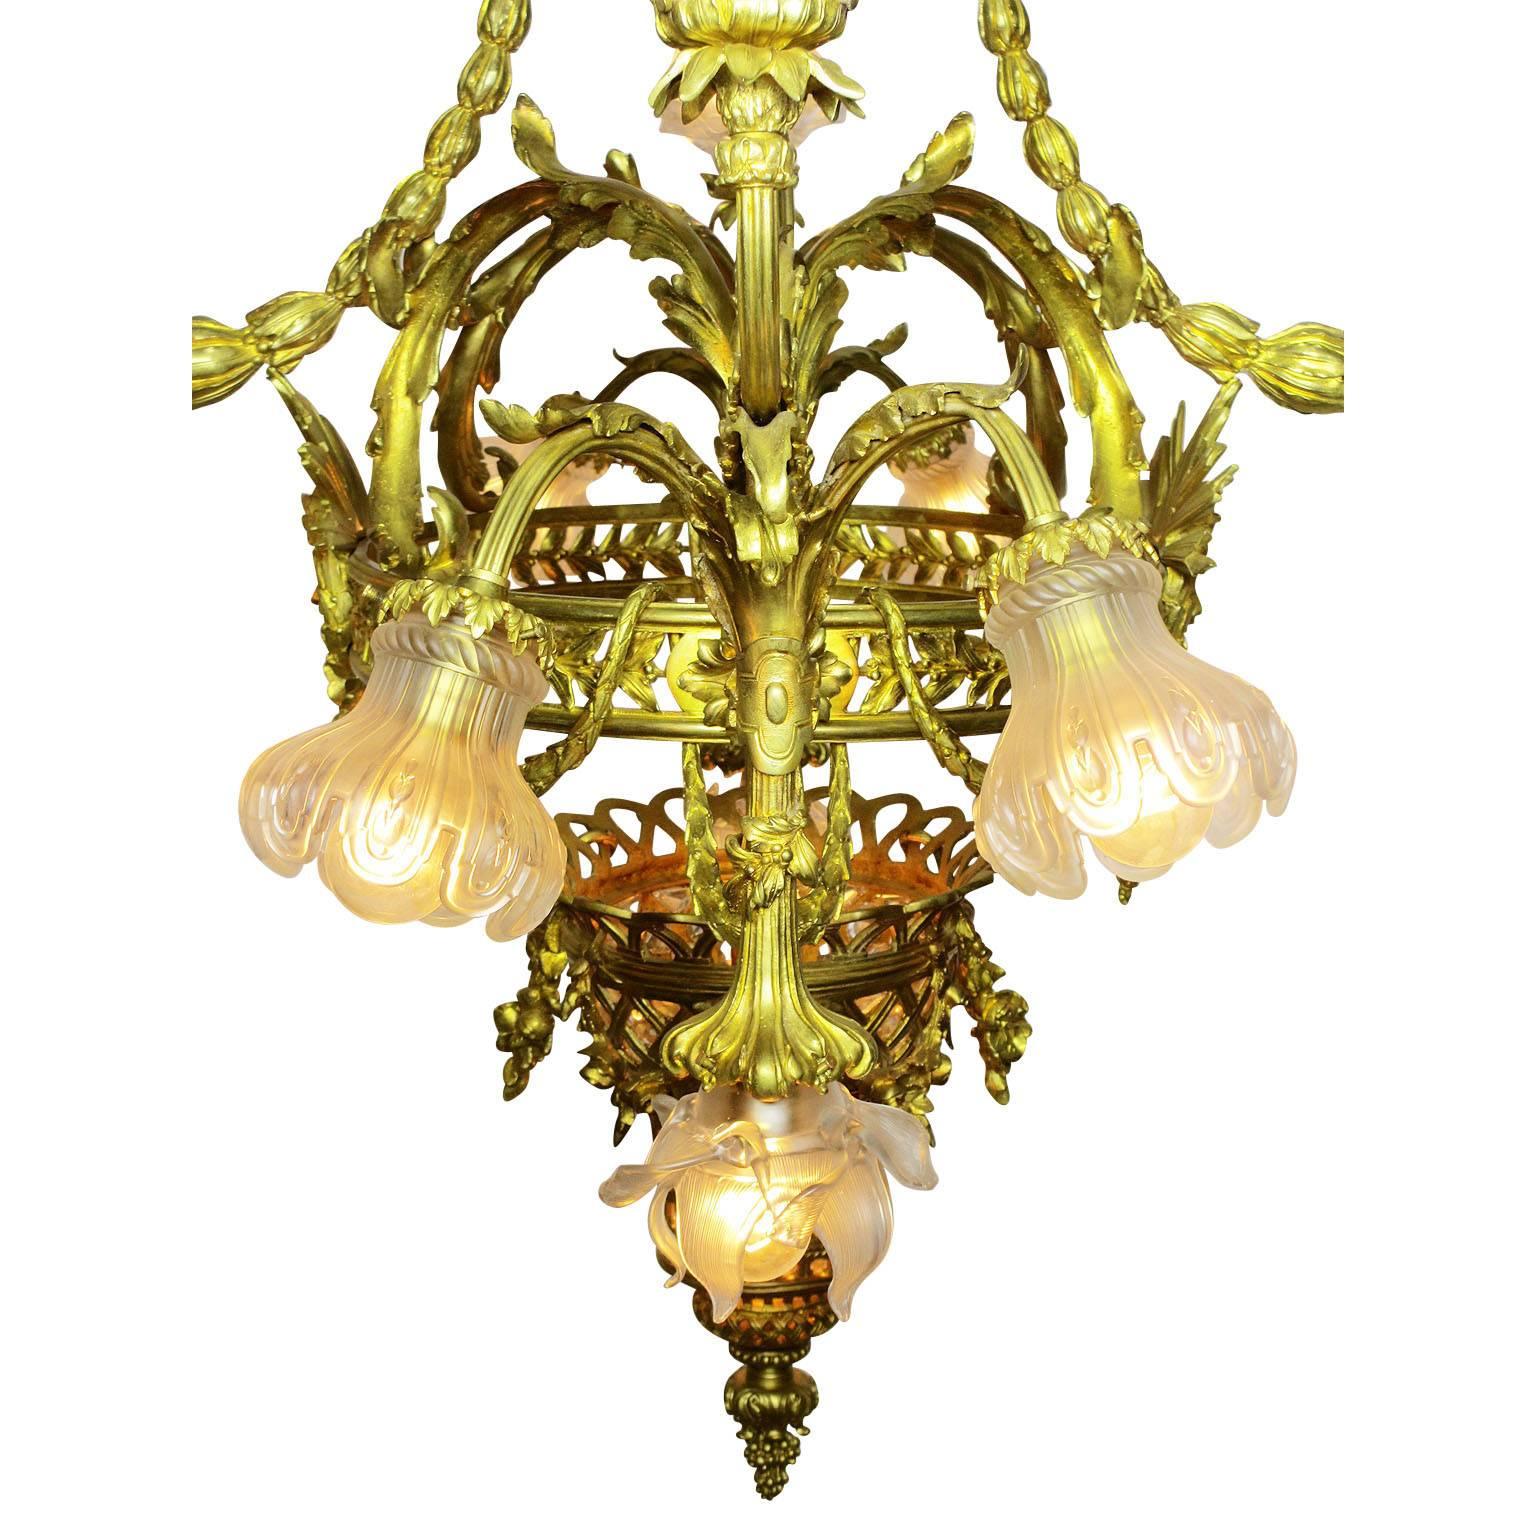 Palatial French 19th/20th Century Louis XIV Style Gilt-Bronze Orante Chandelier  For Sale 3